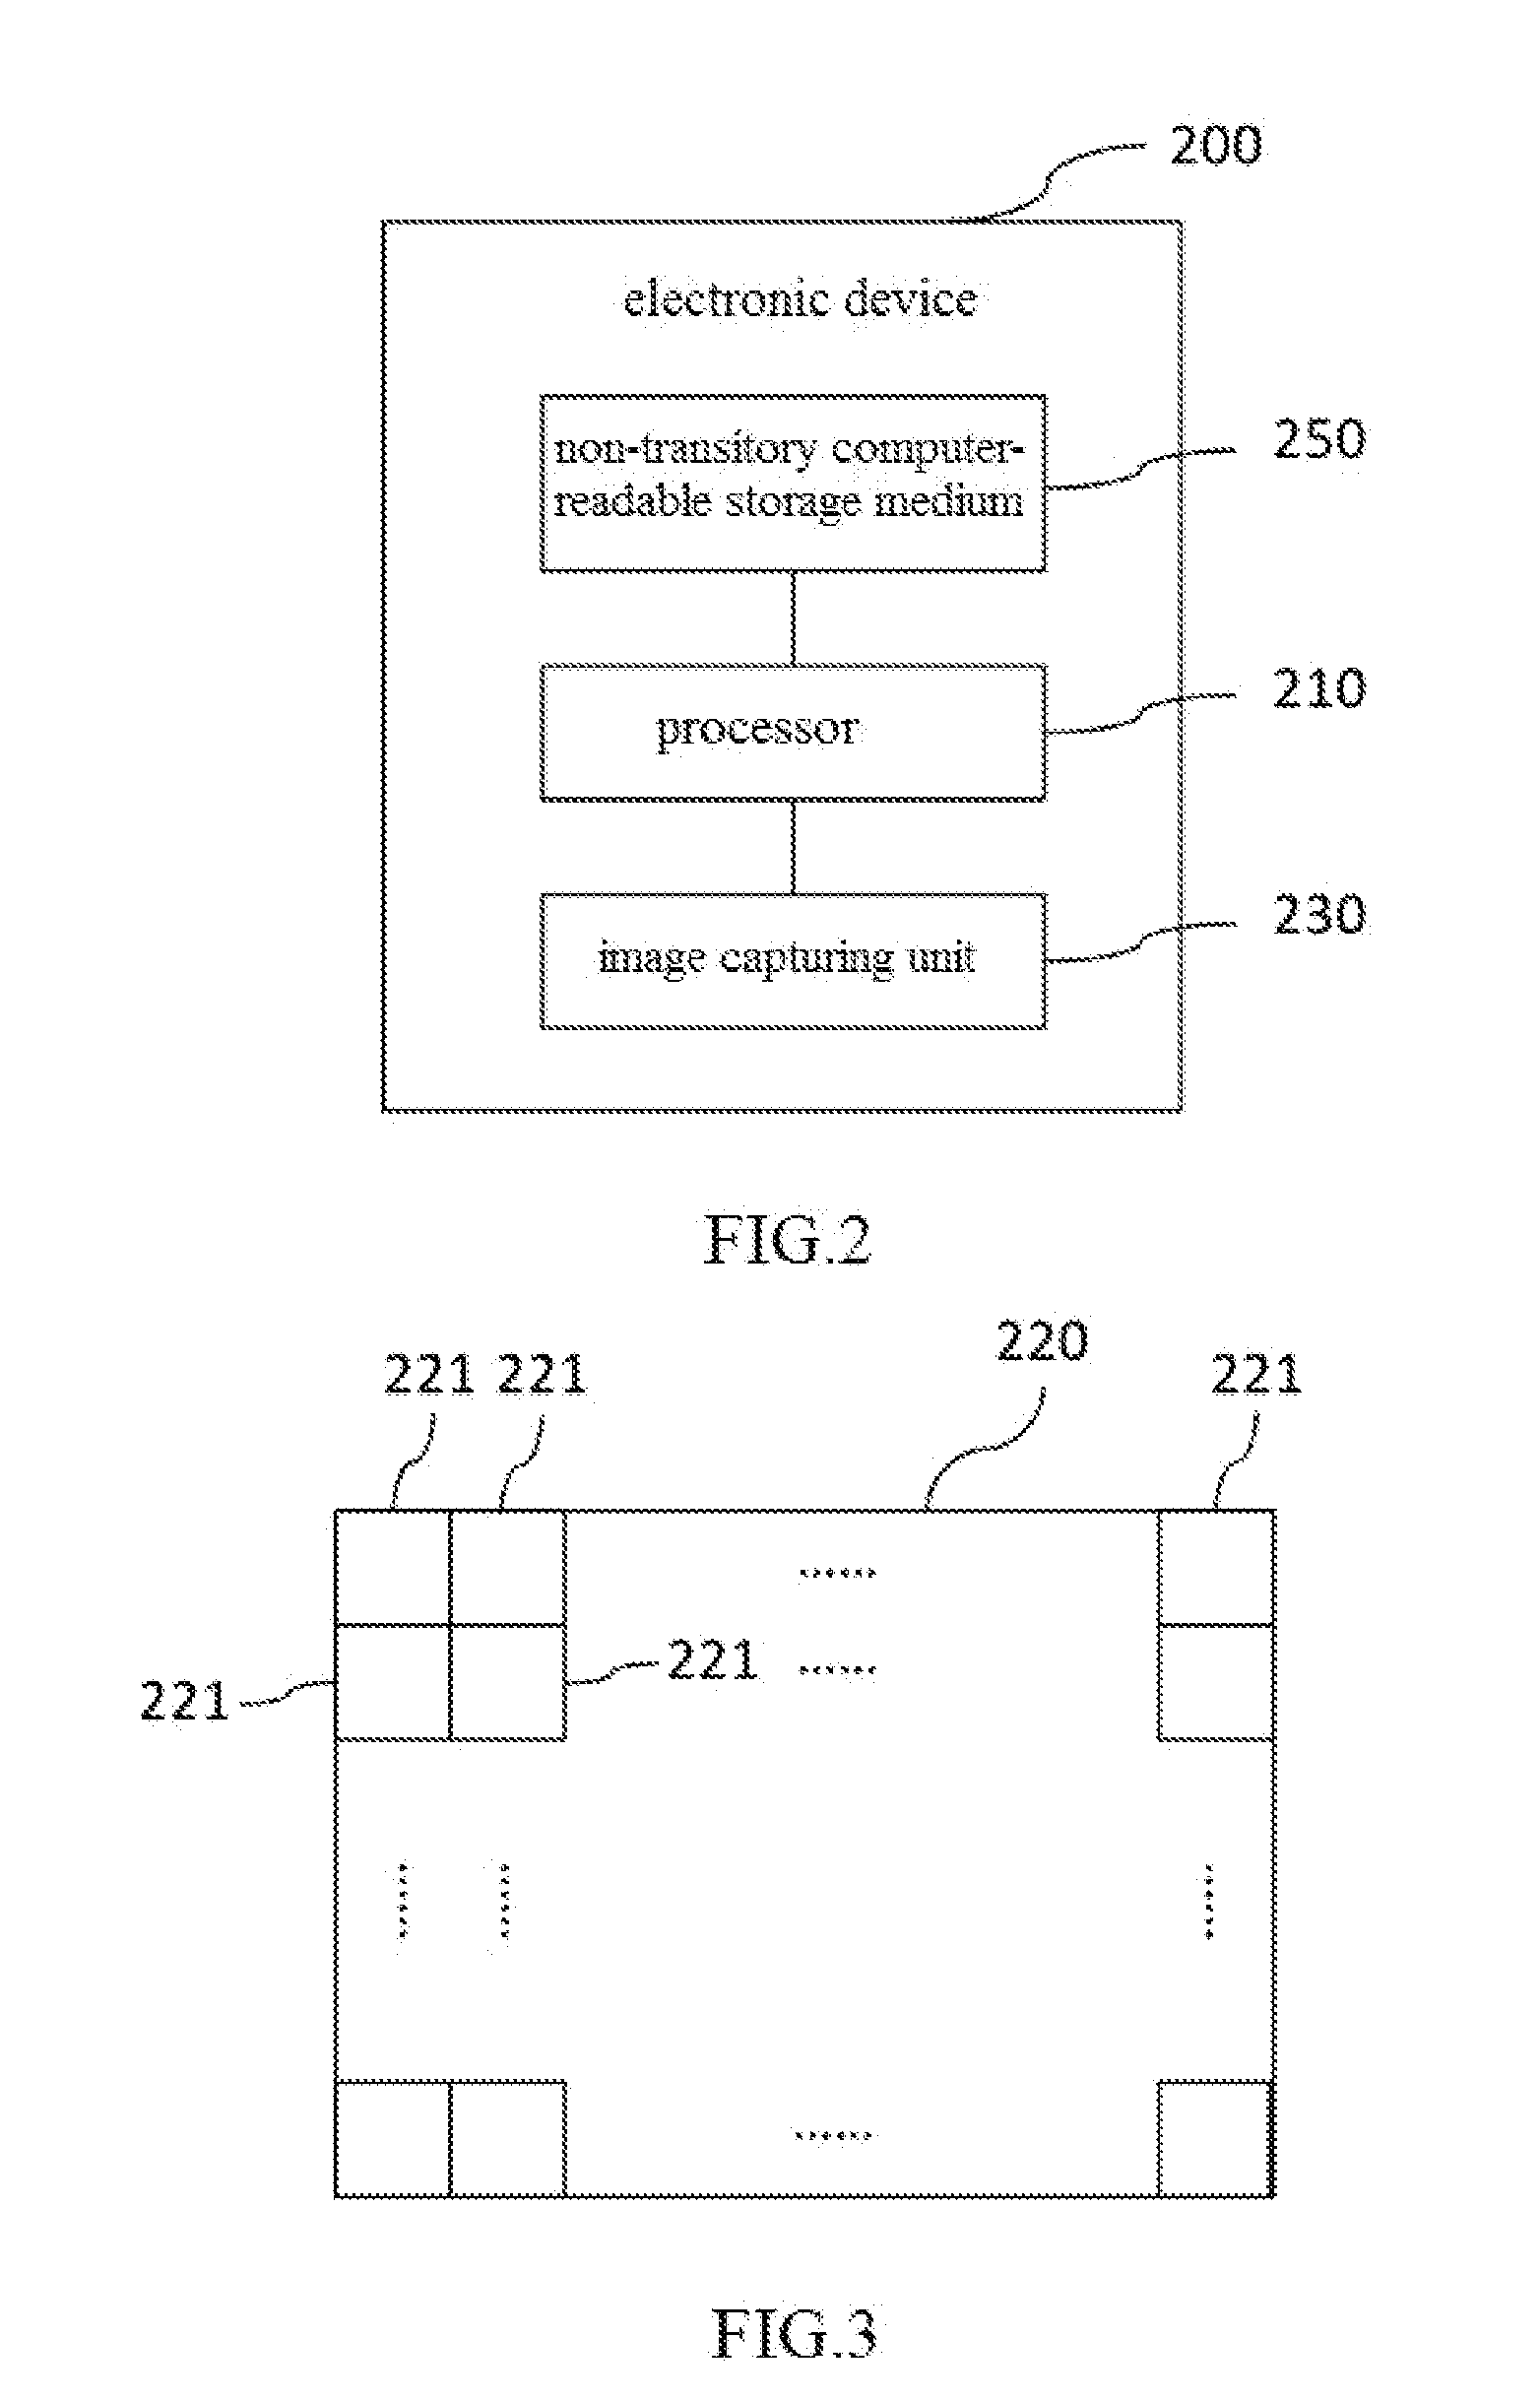 Image processing method, non-transitory computer-readable storage medium and electrical device thereof